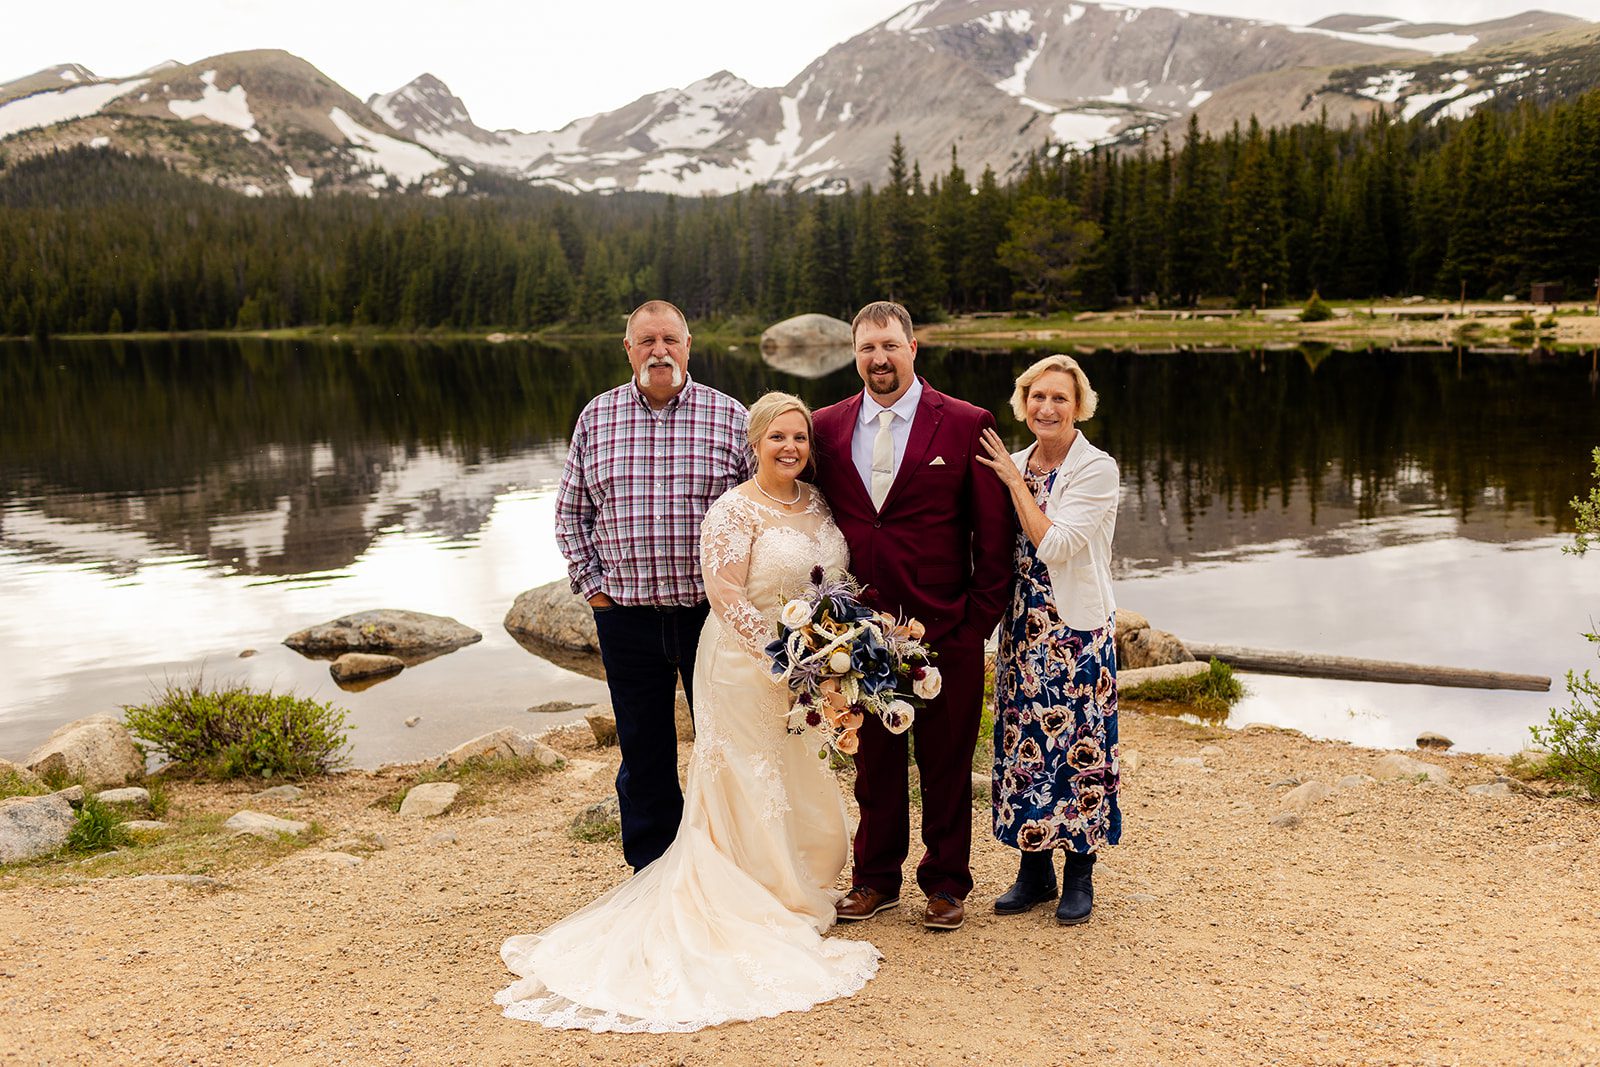 The bride and groom with the grooms parents at Brainard lake.